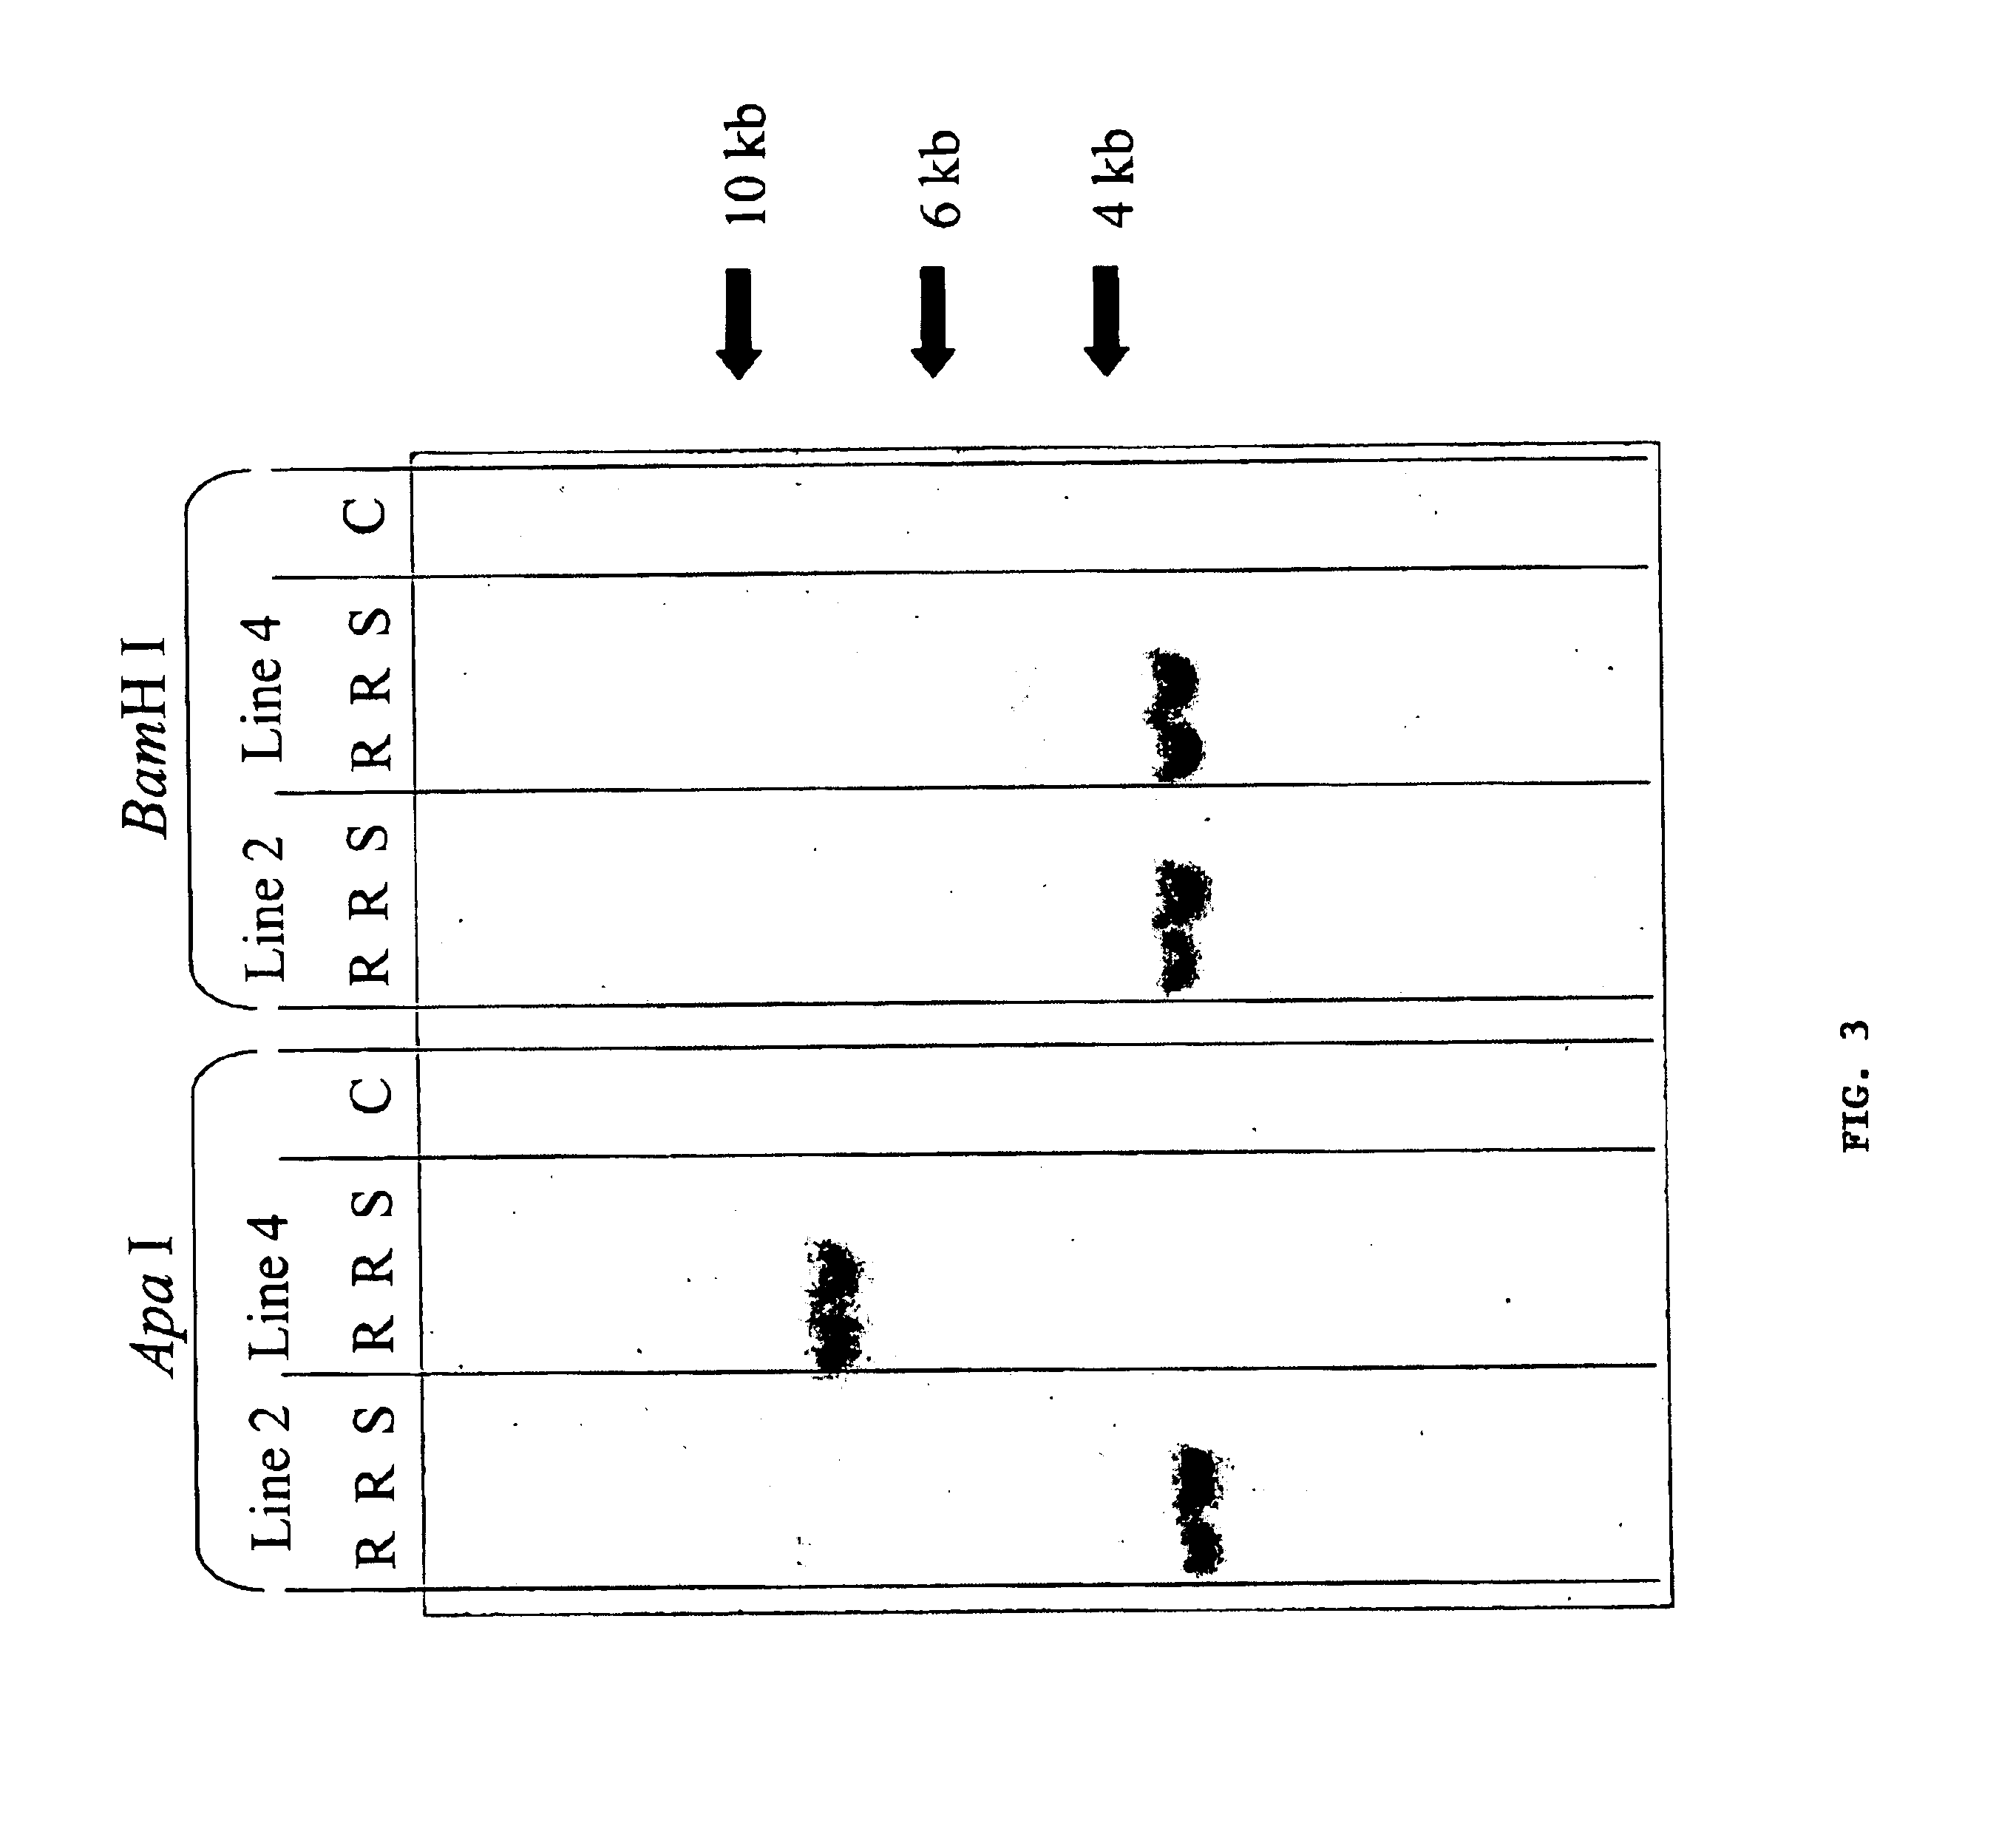 Methods and means for producing barley yellow dwarf virus resistant cereal plants